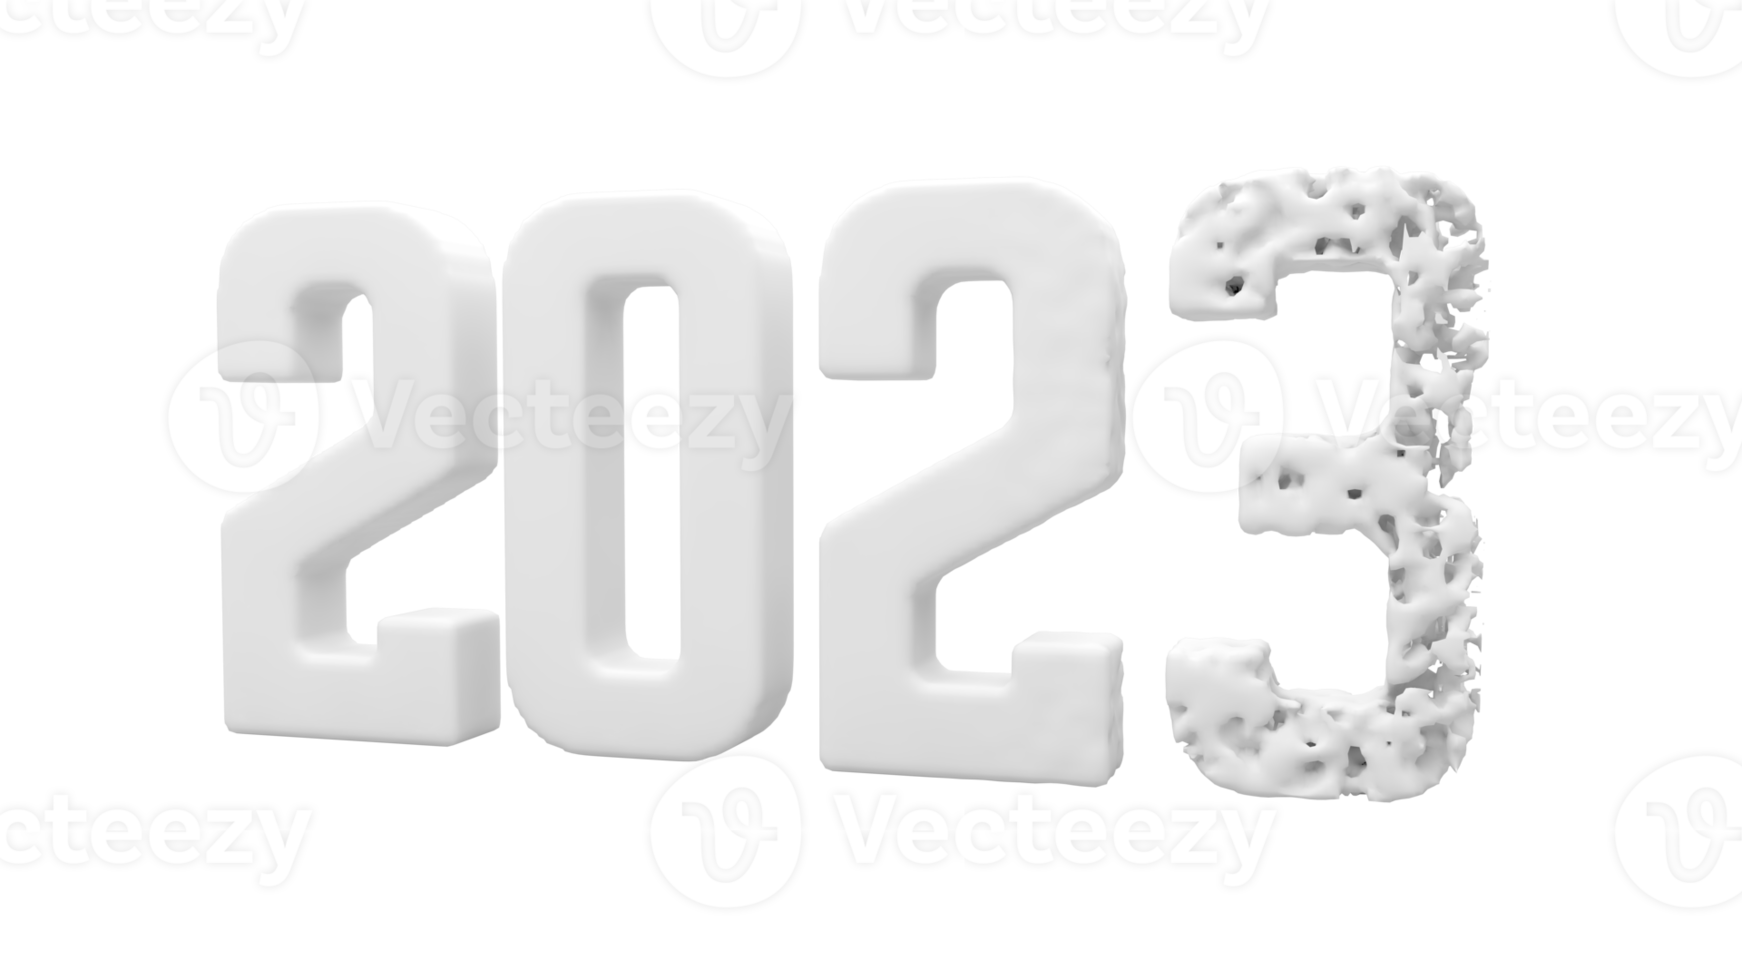 The 2023 year font text 3D render Image. 2023 Year-end concept Photo. 3d rendering of 2023 new year text with a cracked font. The year 2023 is on white background. png